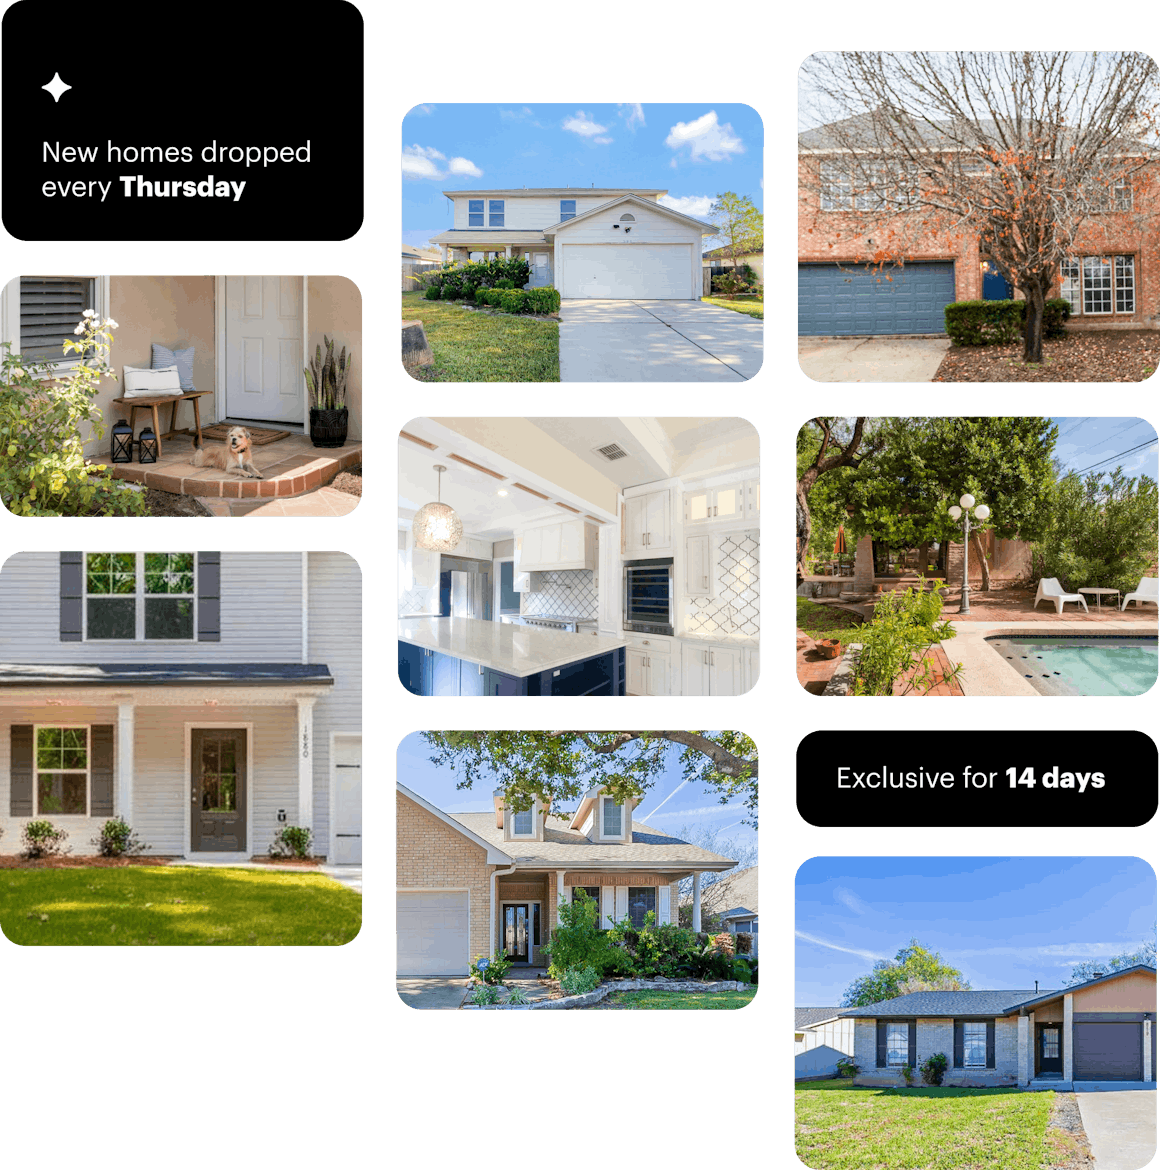 Various styles of Opendoor exclusive homes. New homes get dropped every Thursday and are exclusive to Opendoor for 14 days.